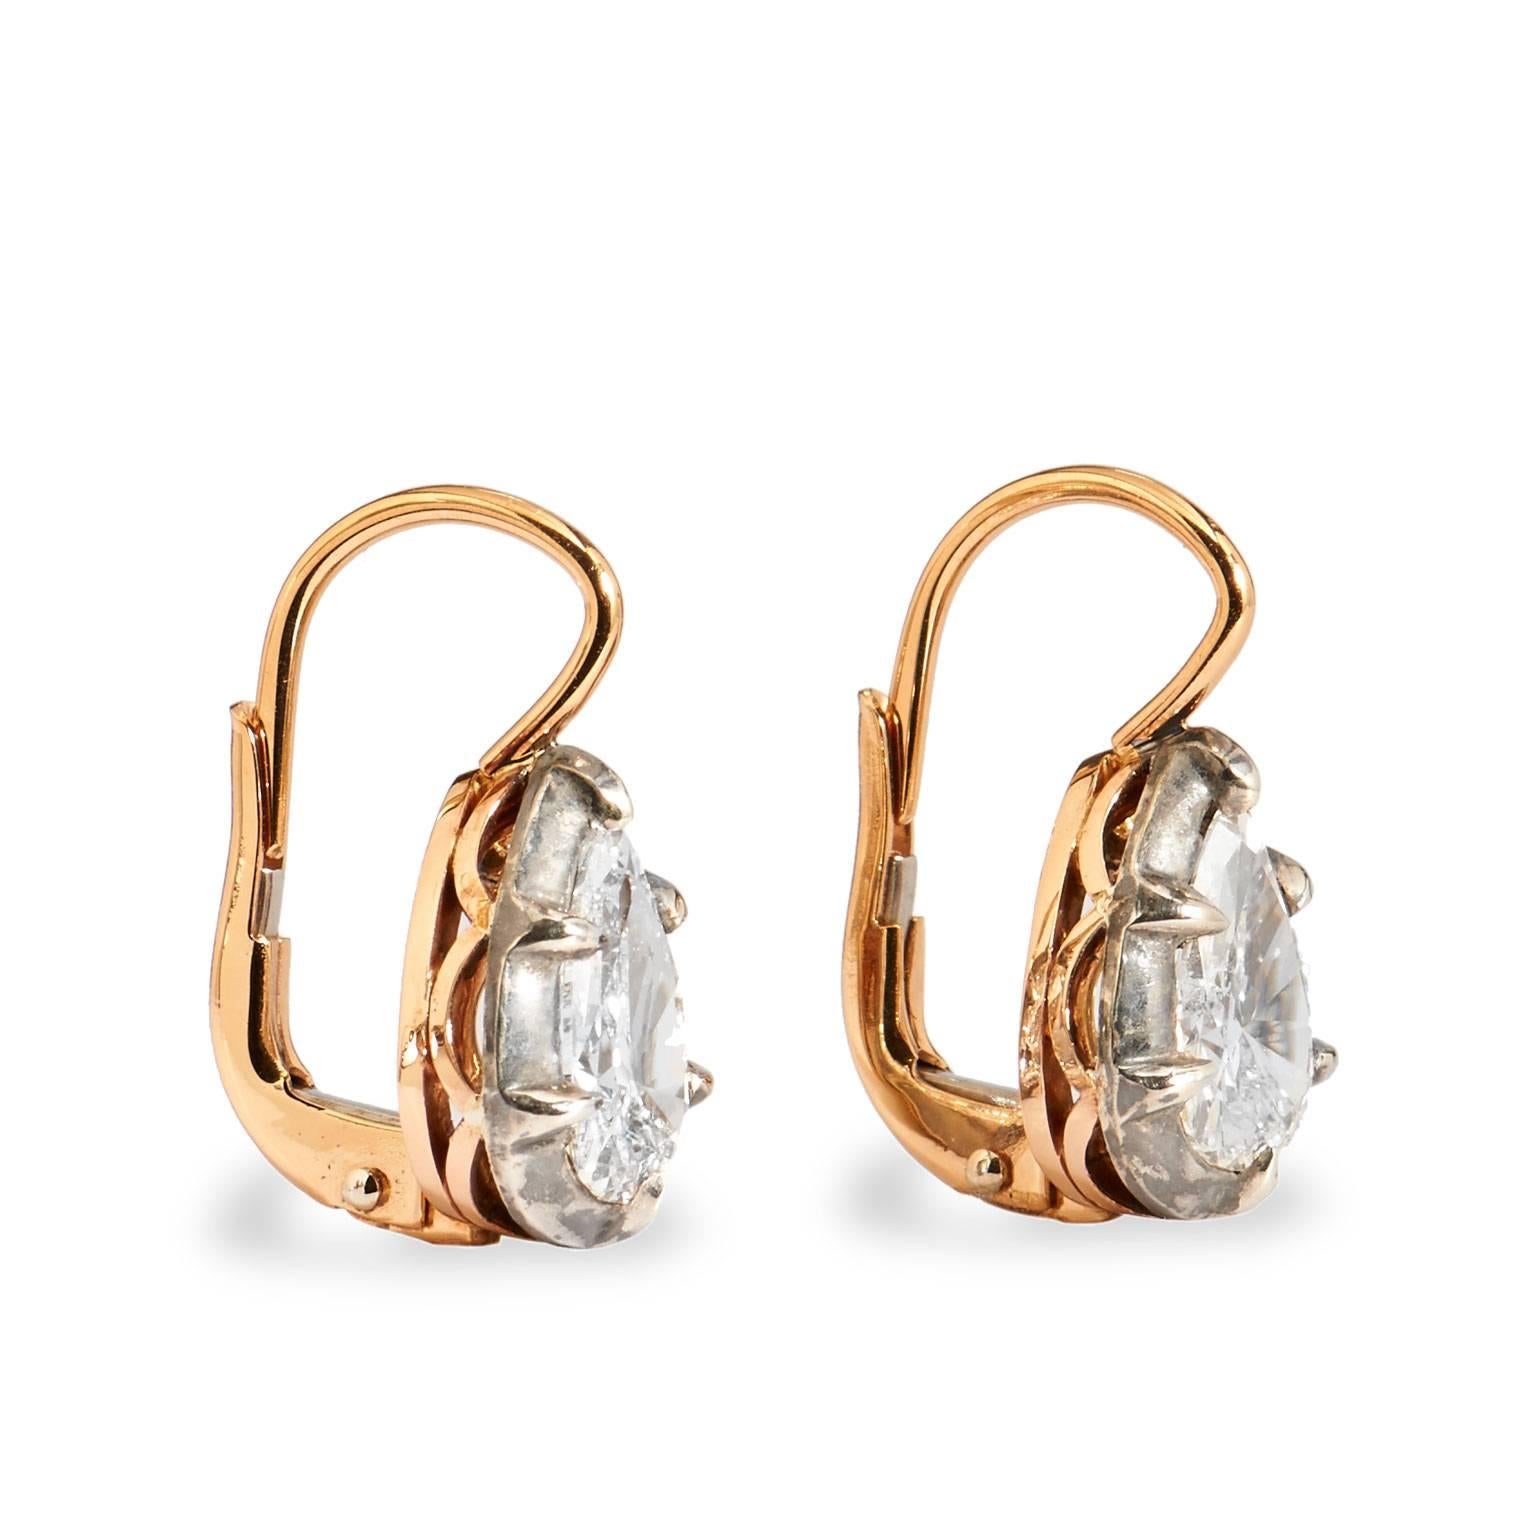 Victorian Inspired 1.82 Carat Pear Shaped Diamond set in 18 karat Gold & Silver 

These elegant earrings are one of a kind and handmade by H&H Jewels.

These Victorian-inspired lever-back earrings are backed in 18 karat rose gold, topped in silver